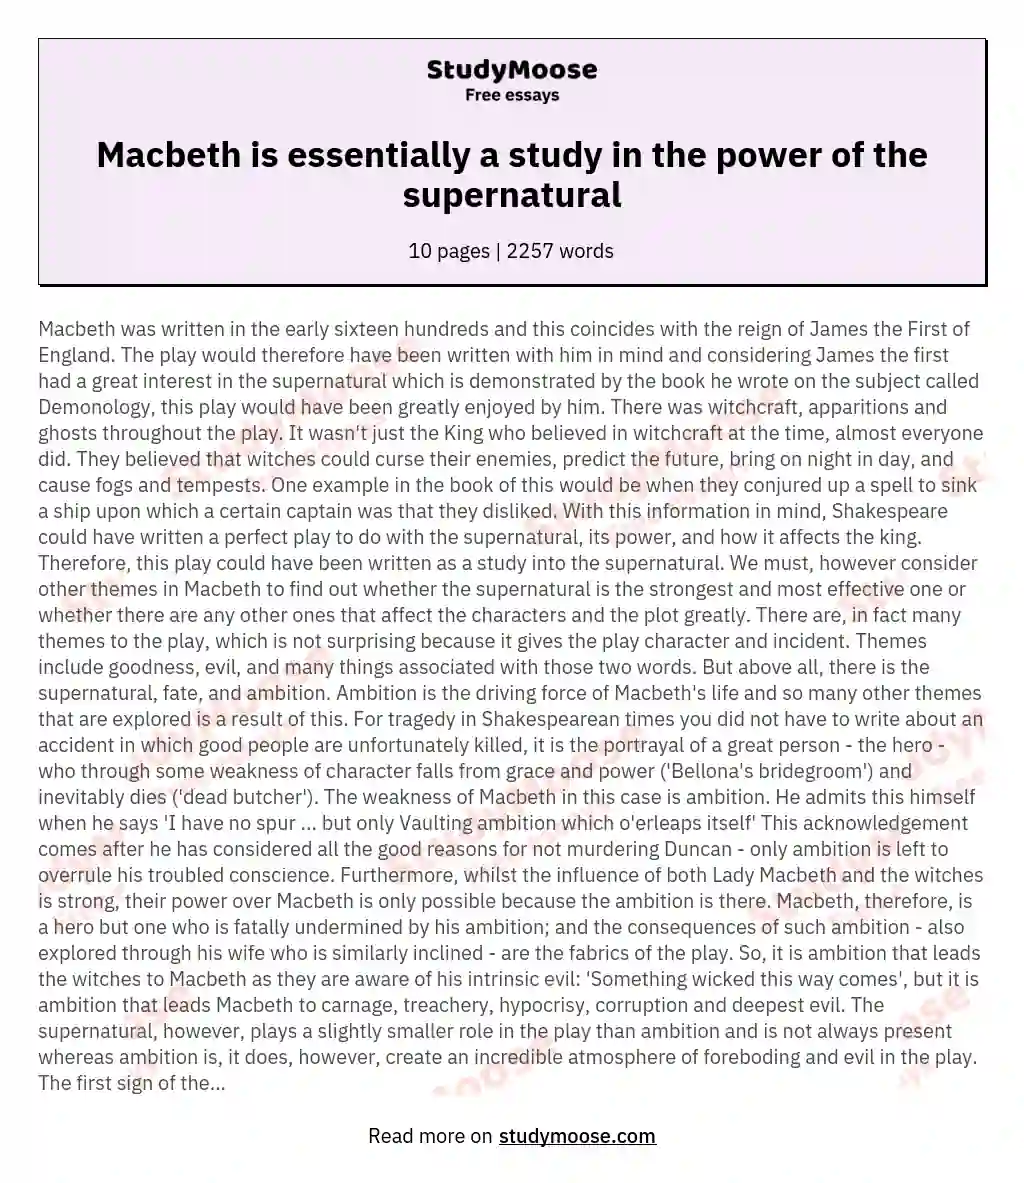 Macbeth is essentially a study in the power of the supernatural essay